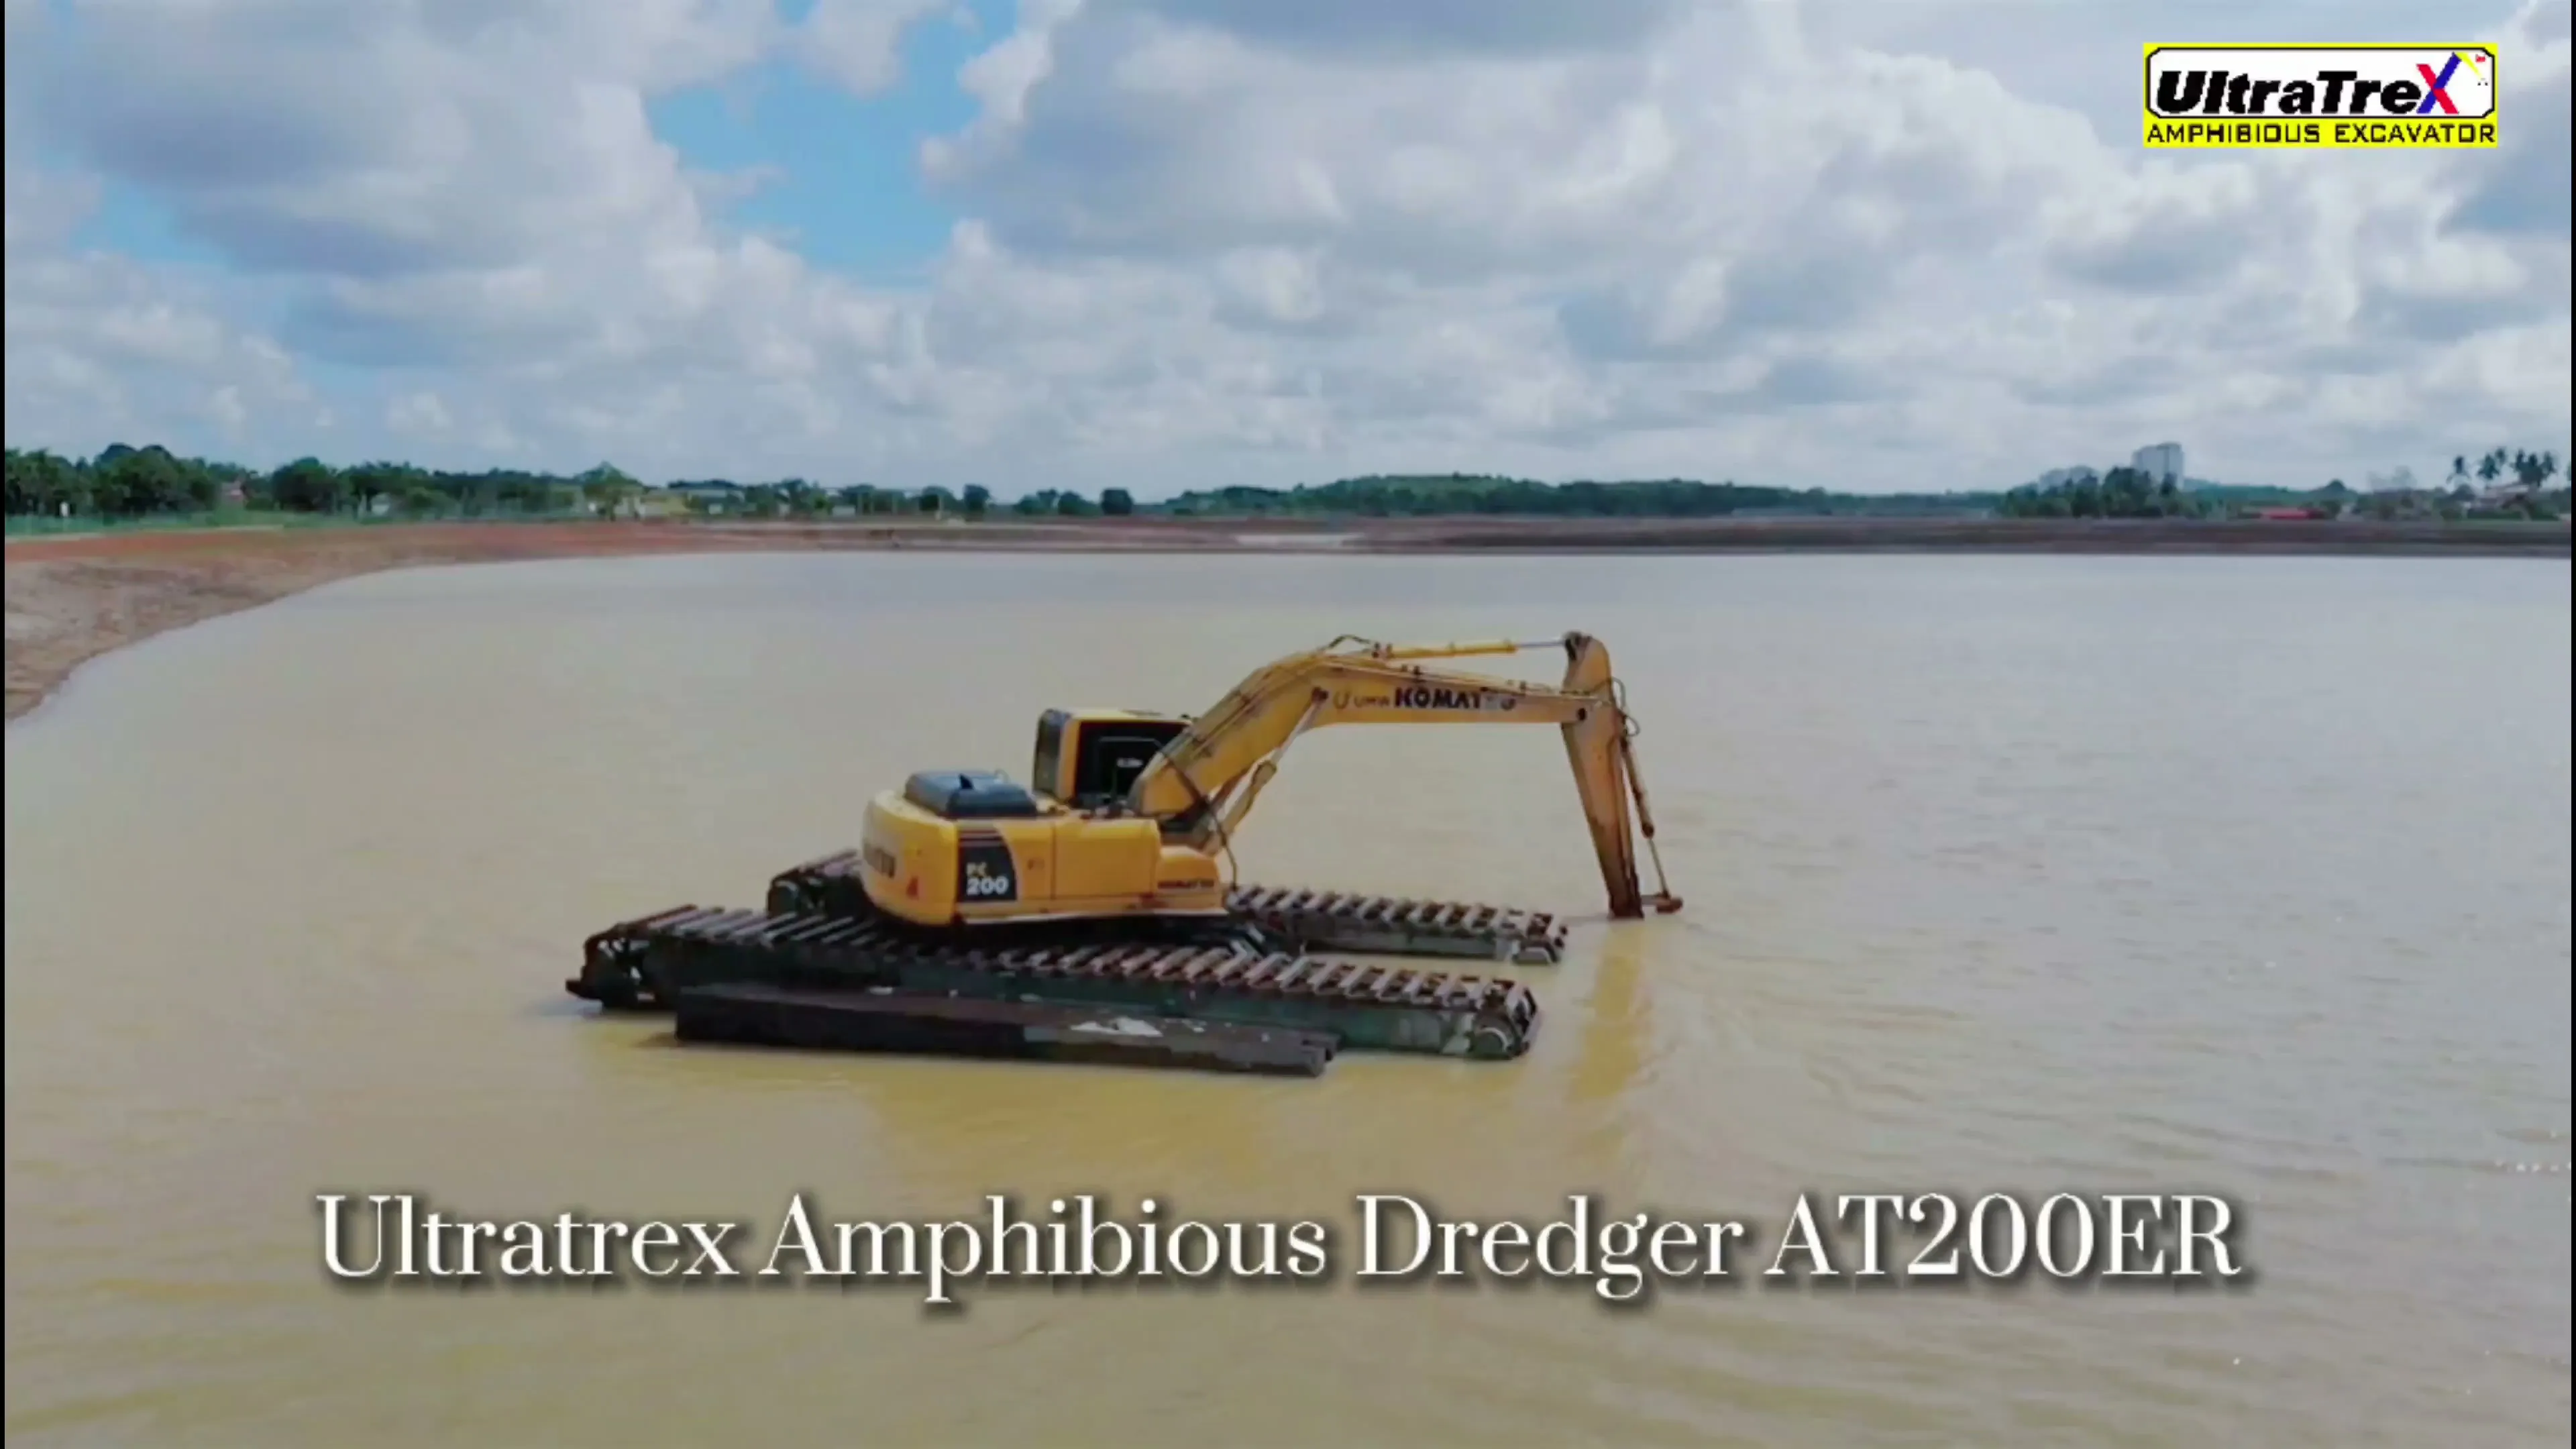 Ultratrex Amphibious Dredger AT200ER working for another new mission of deepening water reservoir.